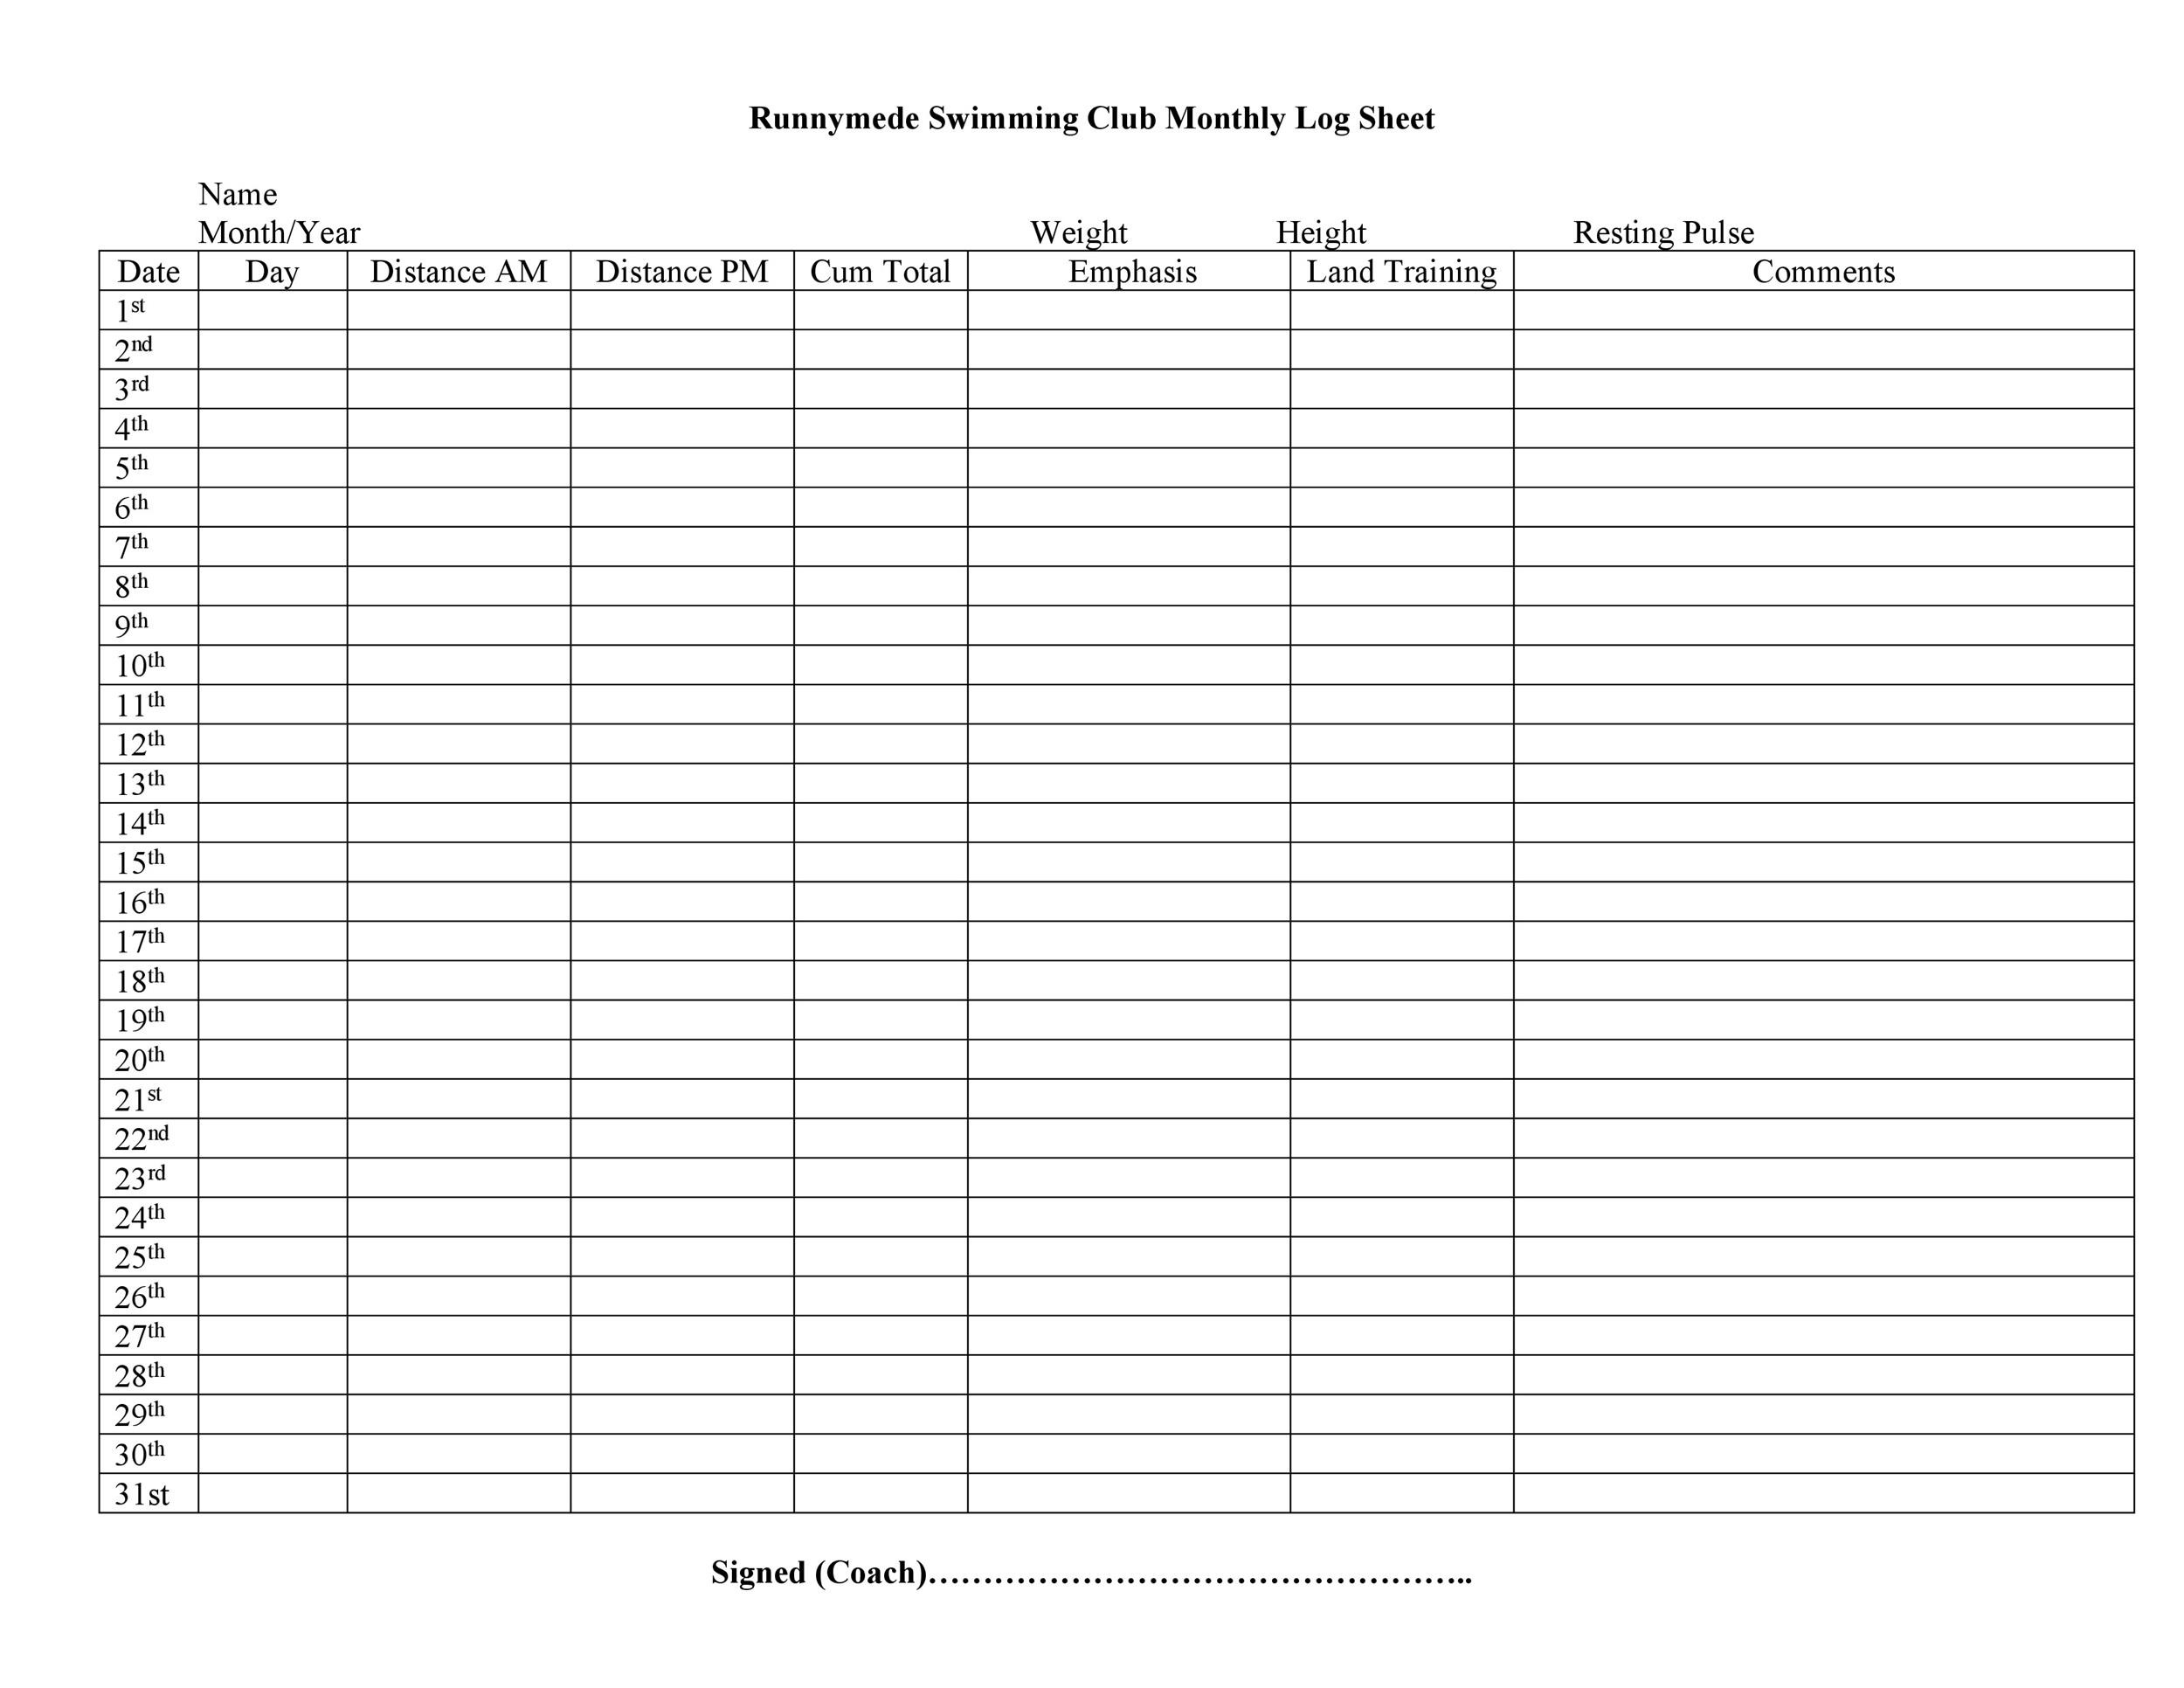 log-sheets-from-excel-spreadsheet-photos